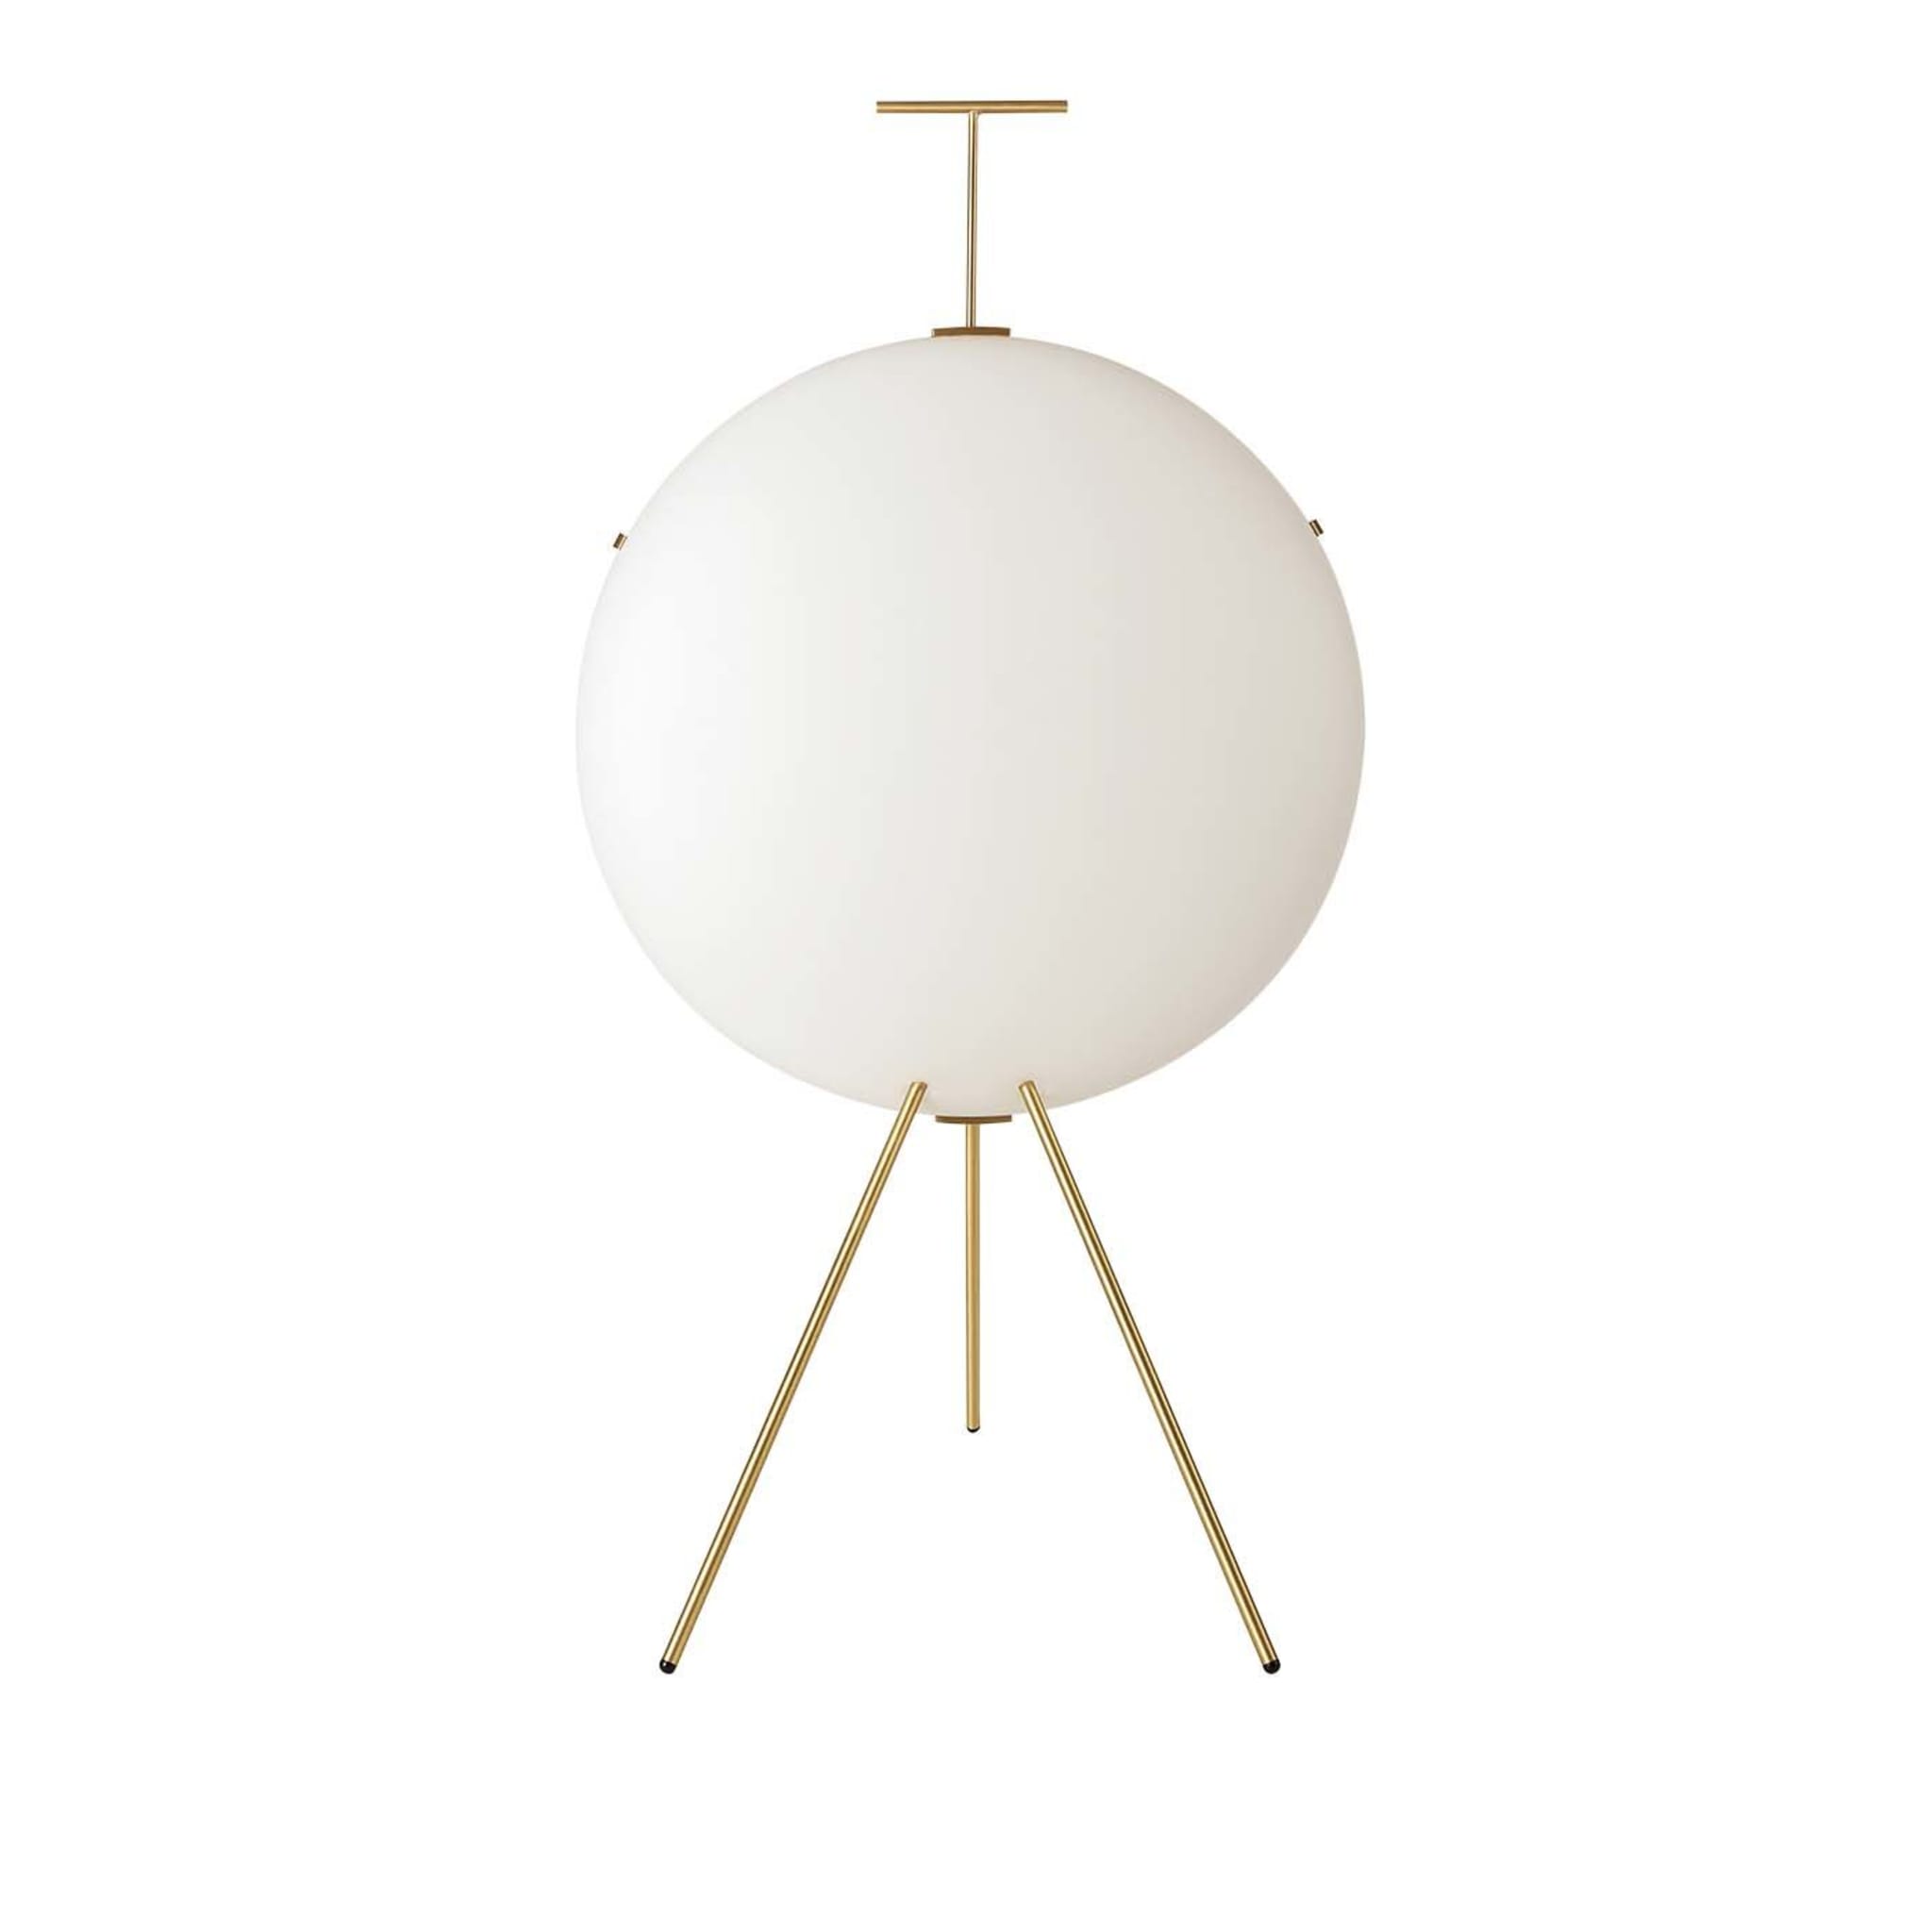 Luna Verticale Floor Lamp 2 by Gio Ponti - Main view